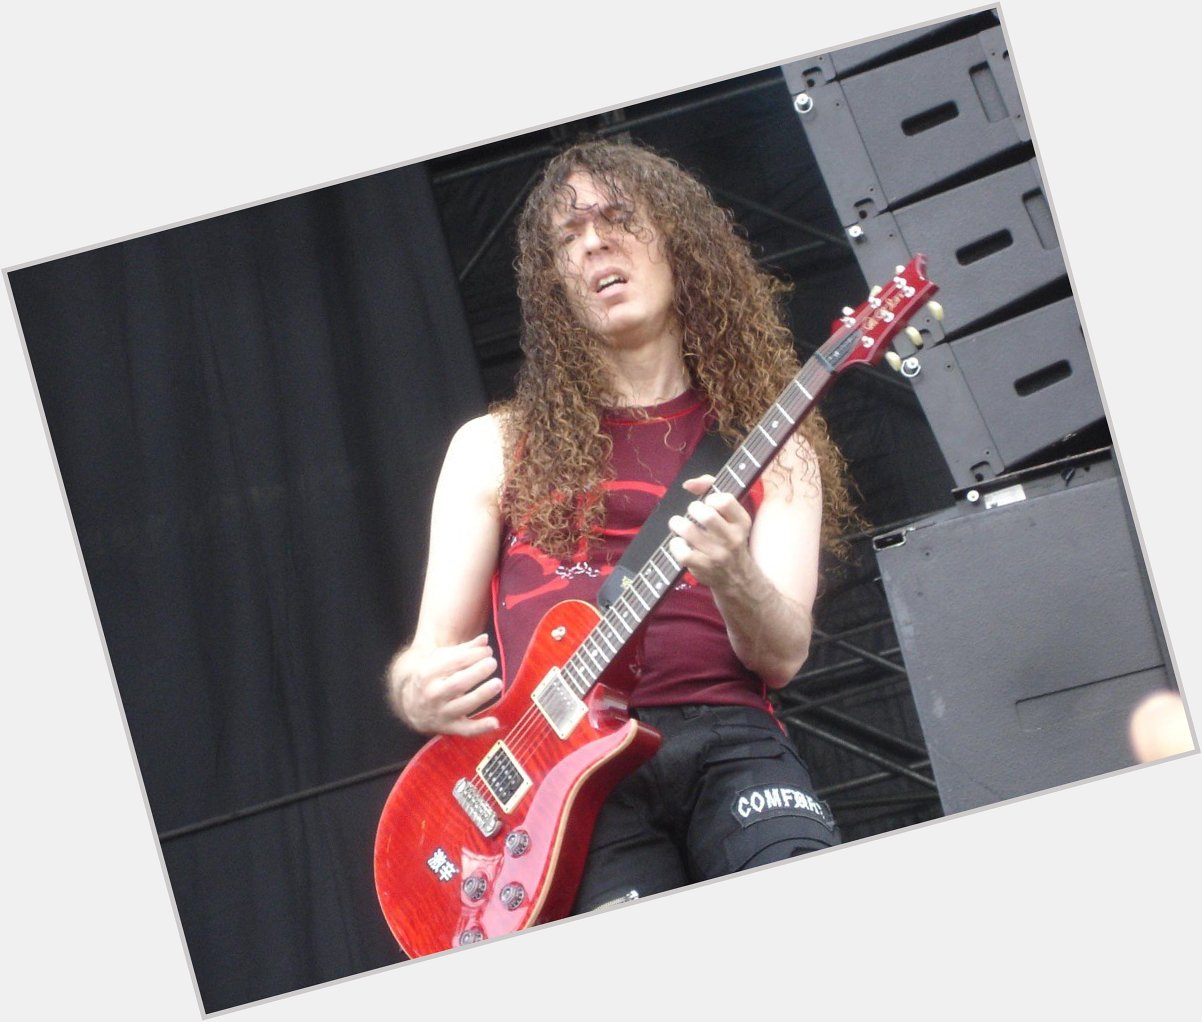 A very Happy Birthday to amazing American heavy metal guitarist Marty Friedman of Megadeth, 53 today (8th December). 